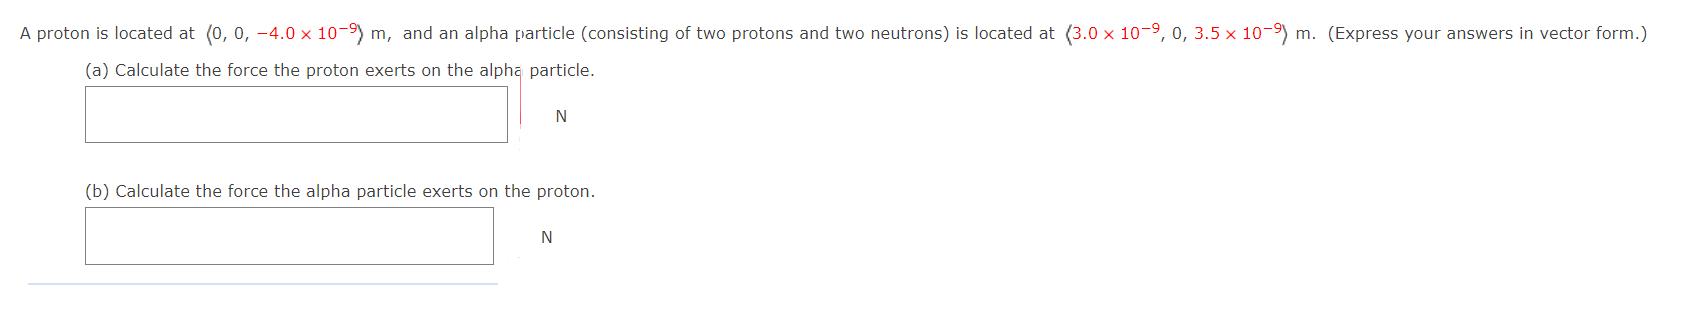 A proton is located at (0, 0, -4.0 x 10-9) m, and an alpha particle (consisting of two protons and two